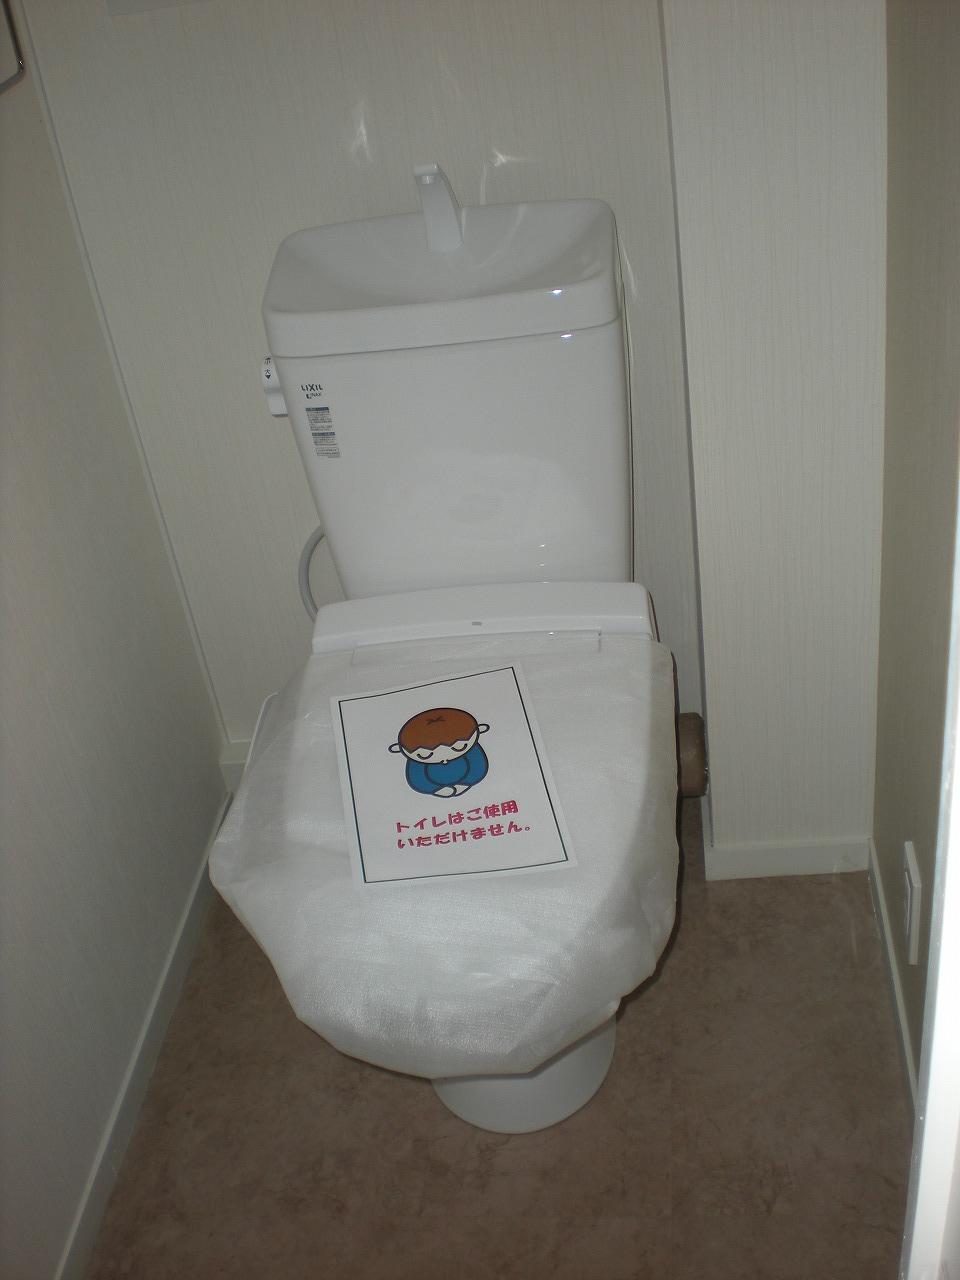 Toilet. It had made